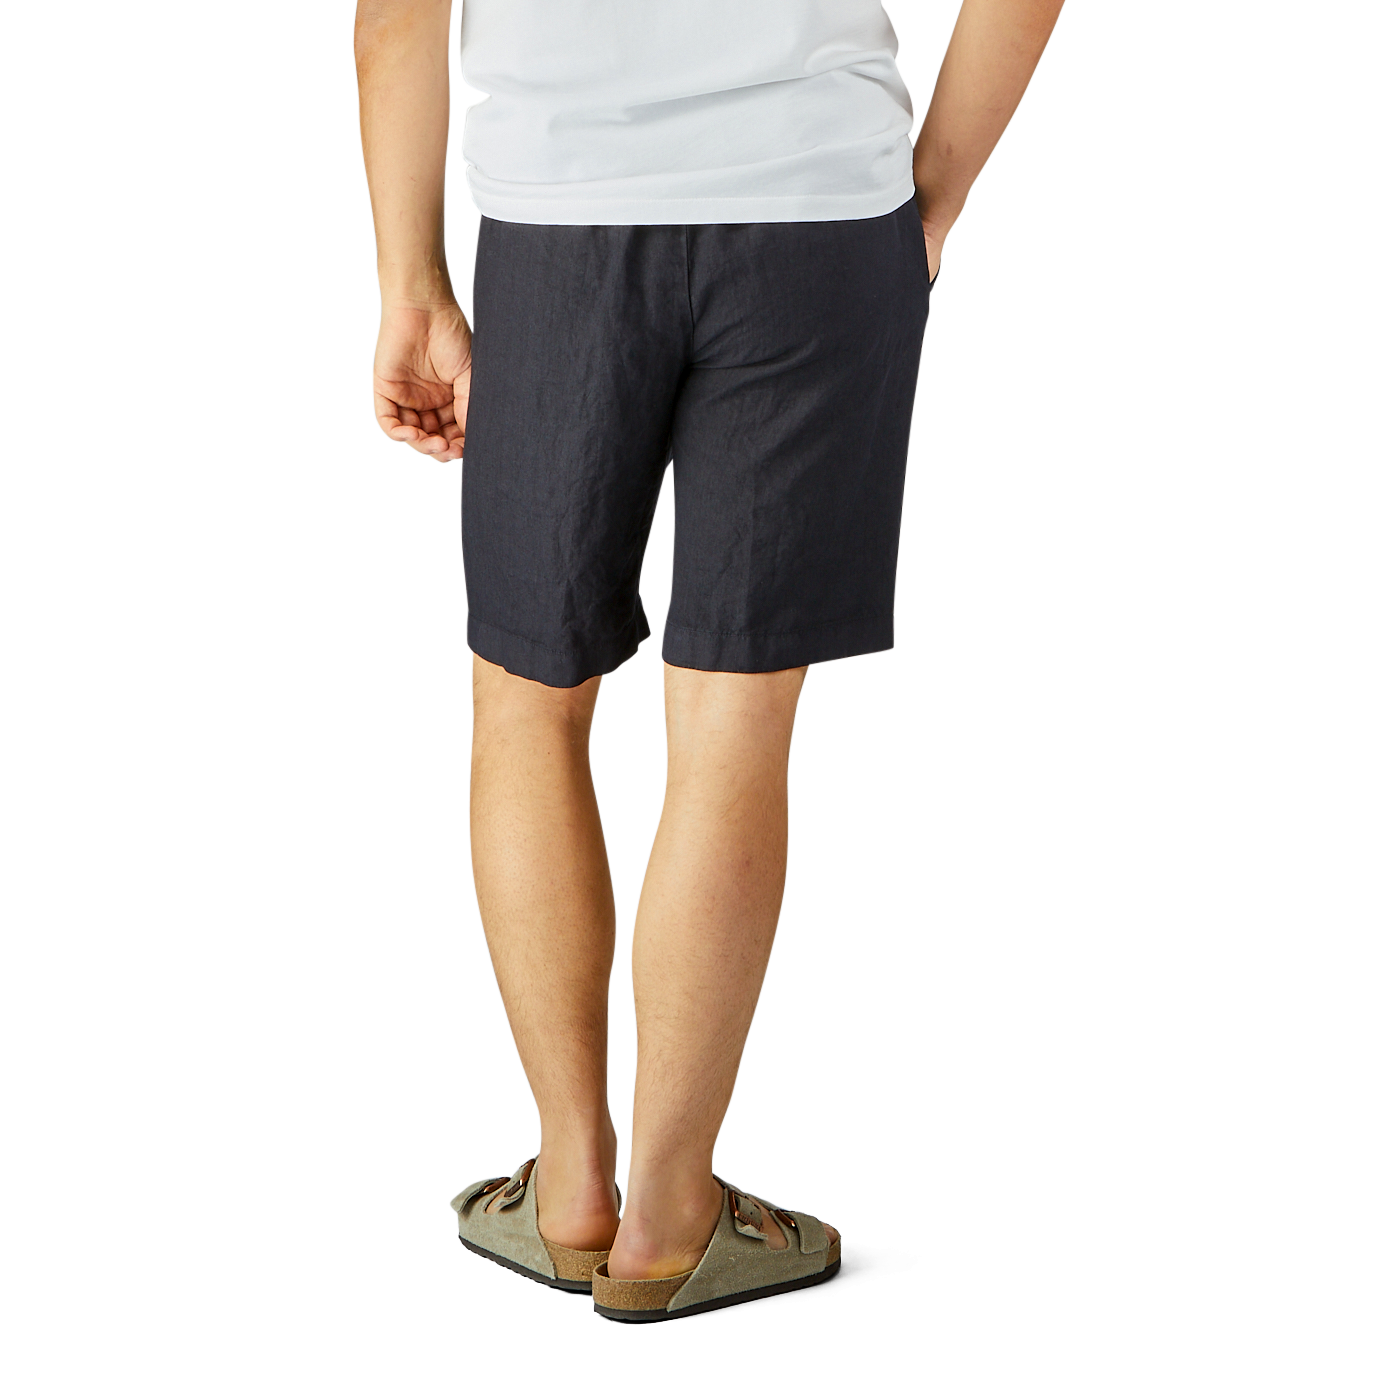 Man standing in Berwich navy blue washed linen drawstring shorts and a white t-shirt, wearing slip-on shoes, against a plain background.